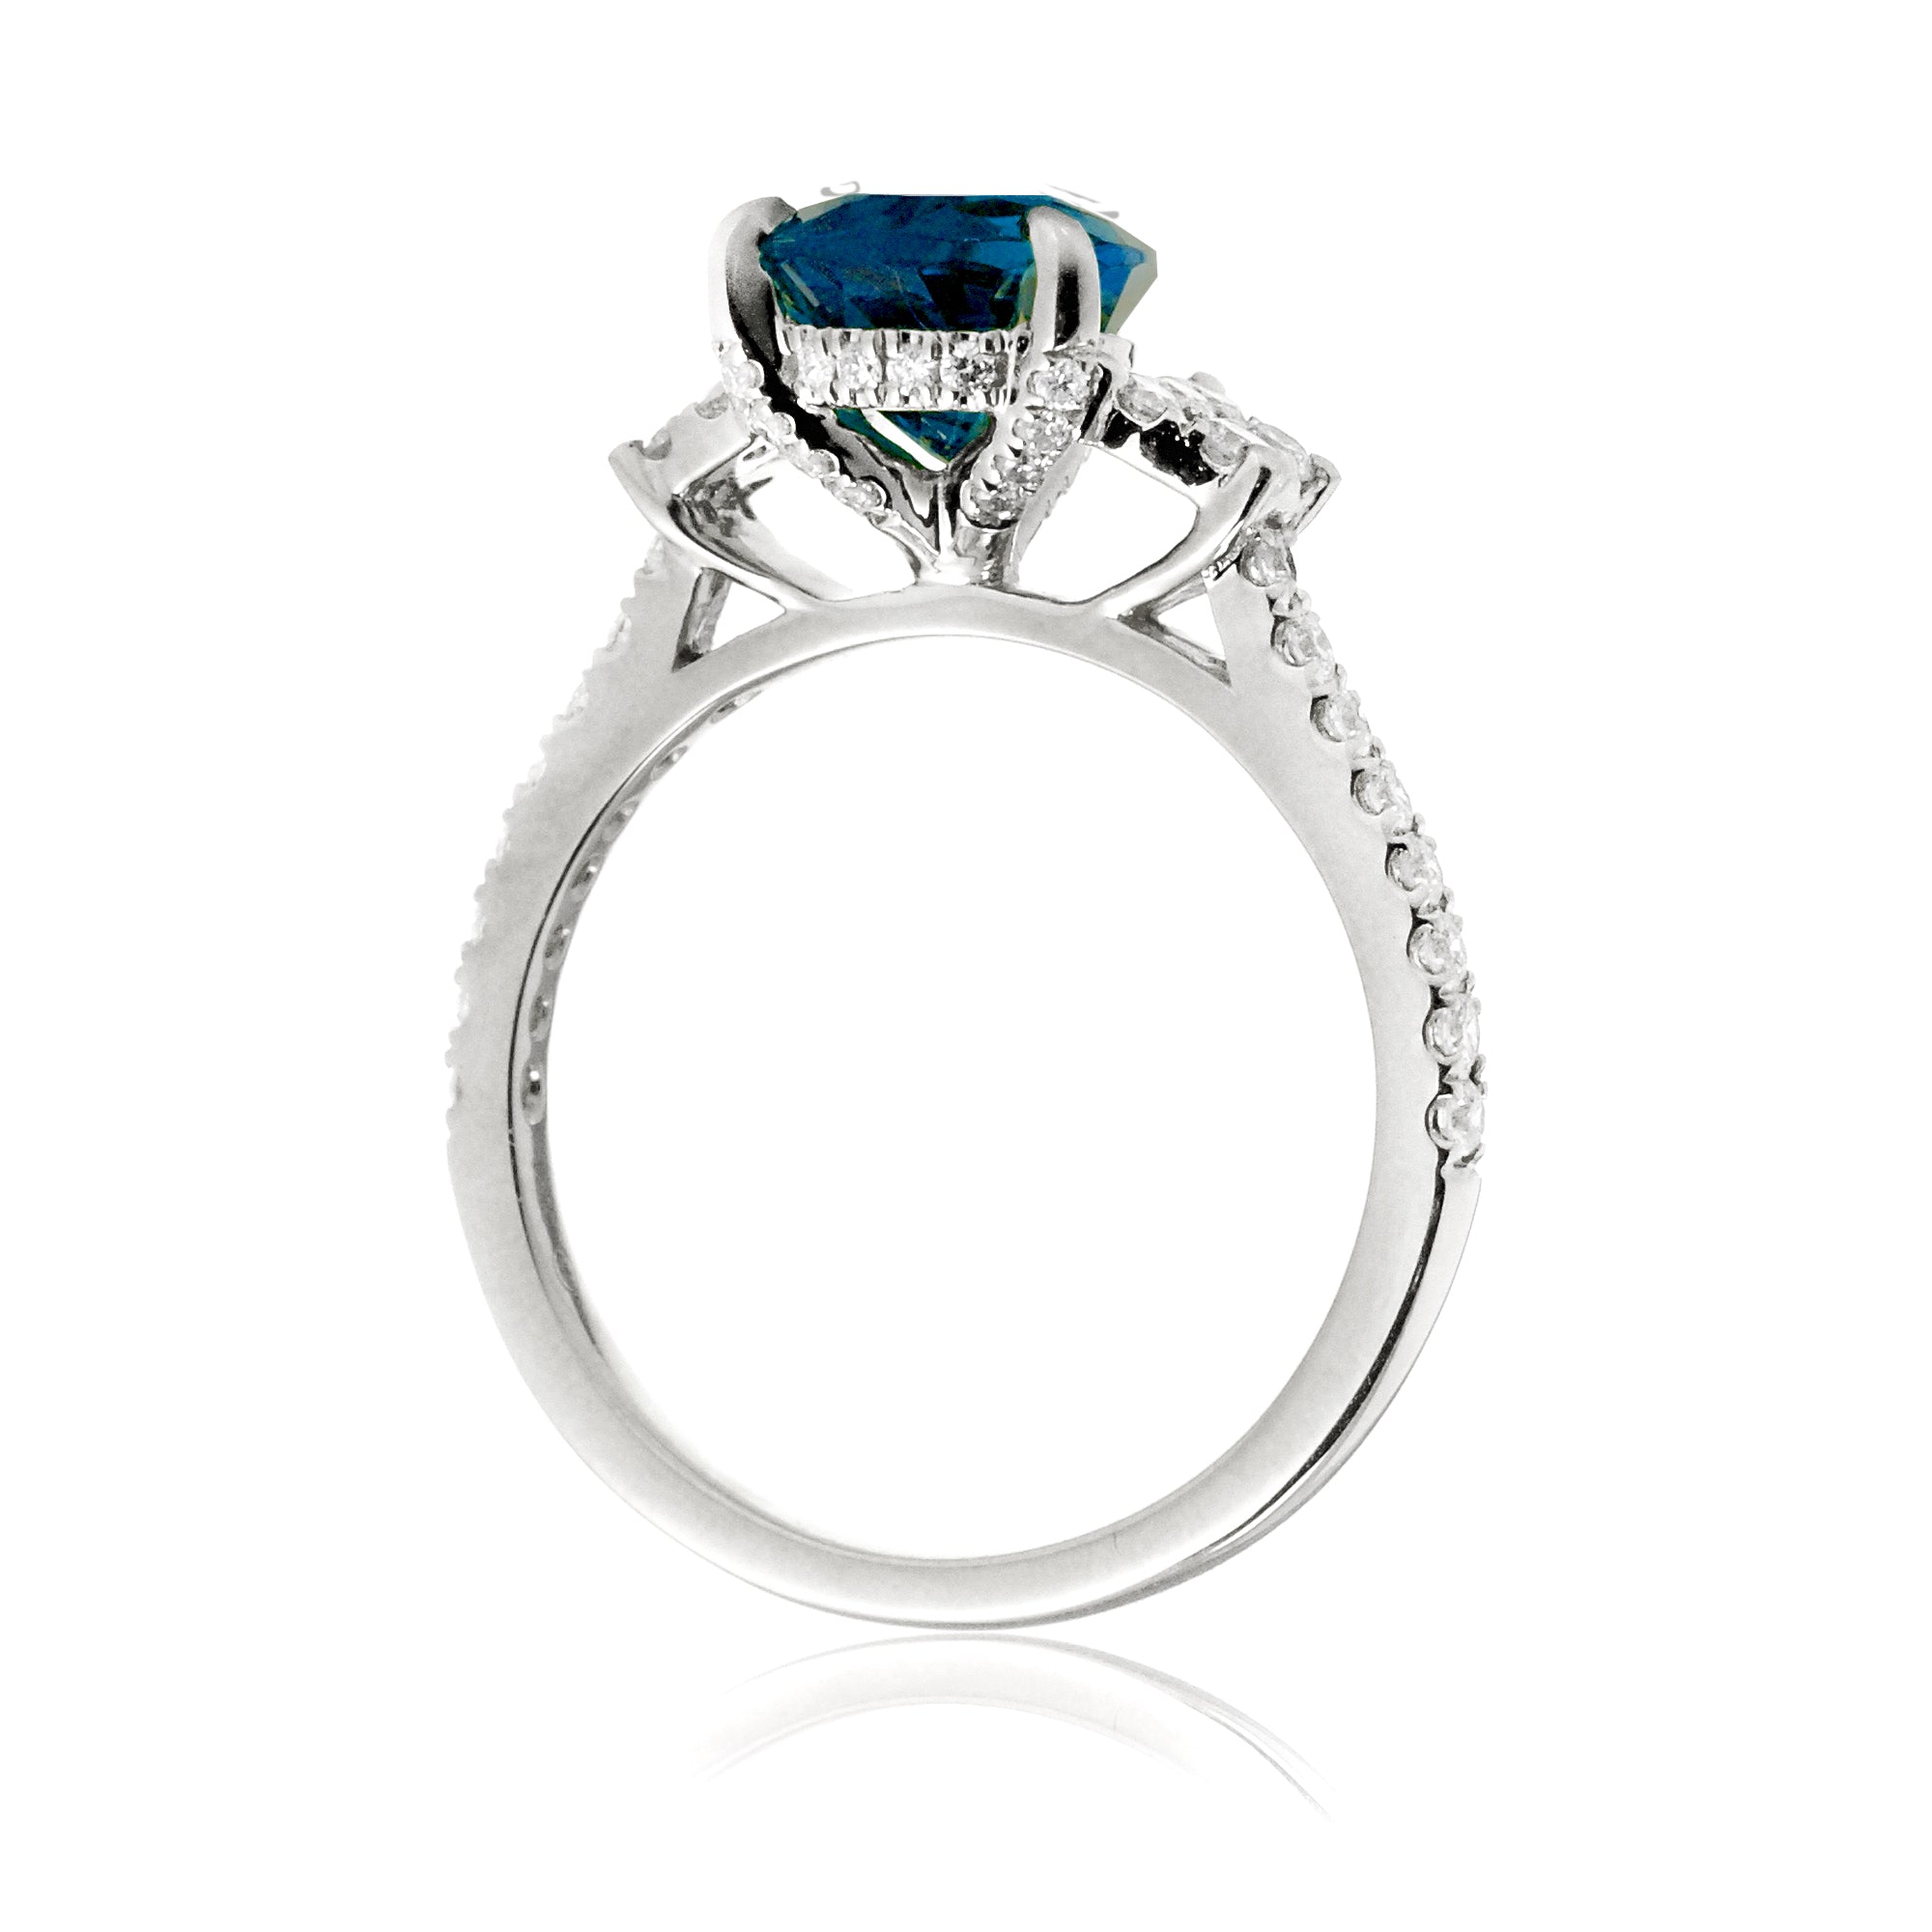 Pear blue sapphire and diamond band engagement ring in white gold